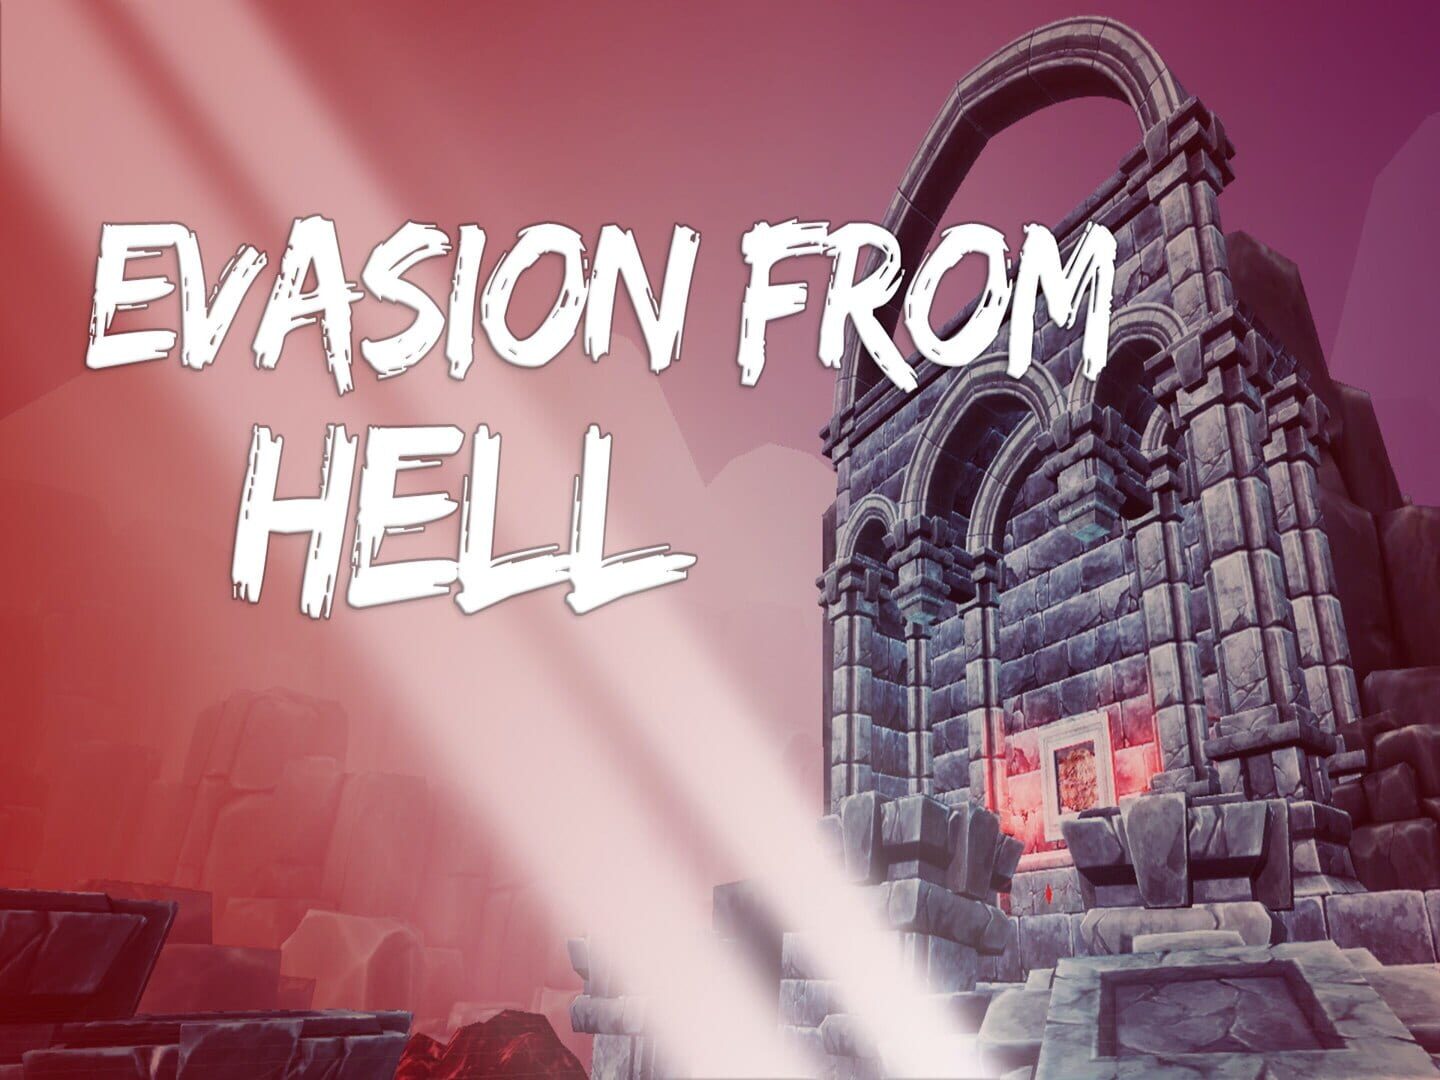 Evasion From Hell artwork